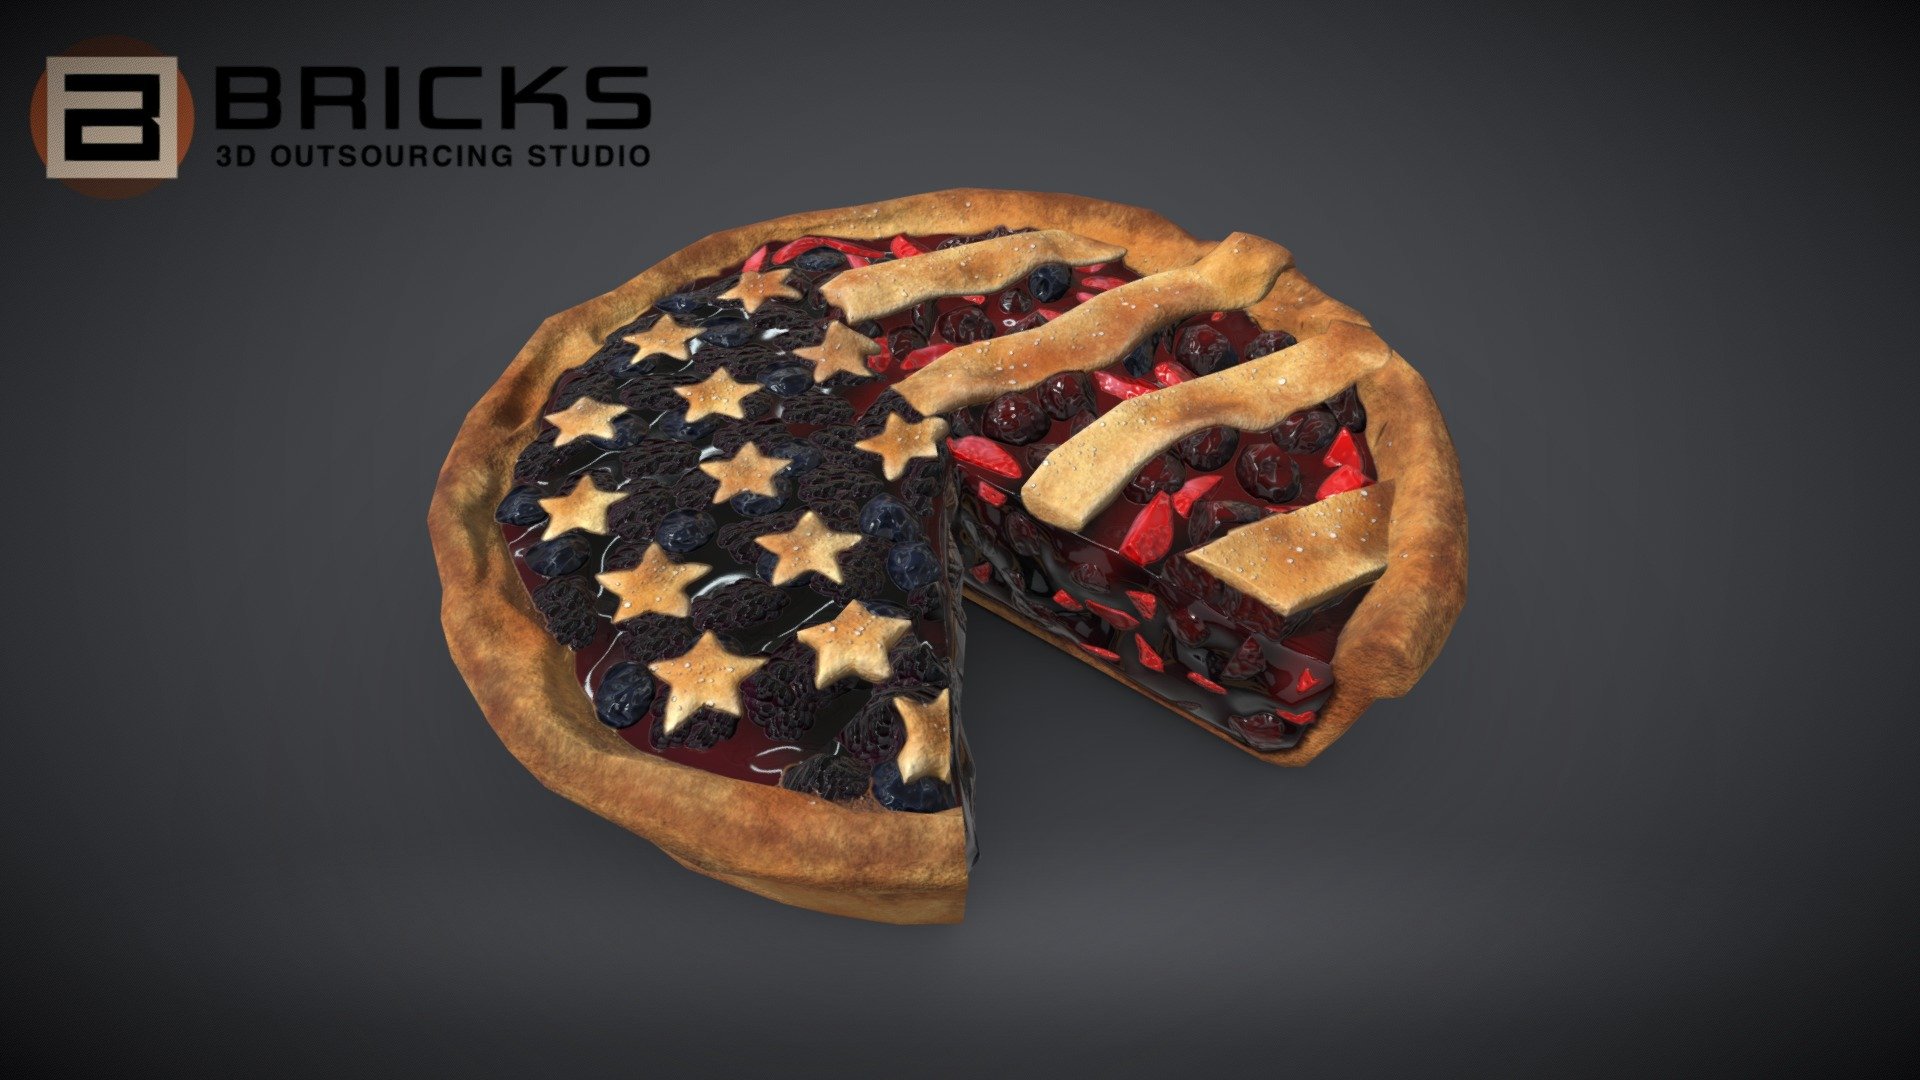 PBR Food Asset:
PatriotPie_Chart
Polycount: 1466
Vertex count: 735
Texture Size: 2048px x 2048px
Normal: OpenGL

If you need any adjust in file please contact us: team@bricks3dstudio.com

Hire us: tringuyen@bricks3dstudio.com
Here is us: https://www.bricks3dstudio.com/
        https://www.artstation.com/bricksstudio
        https://www.facebook.com/Bricks3dstudio/
        https://www.linkedin.com/in/bricks-studio-b10462252/ - PatriotPieChart - Buy Royalty Free 3D model by Bricks Studio (@bricks3dstudio) 3d model